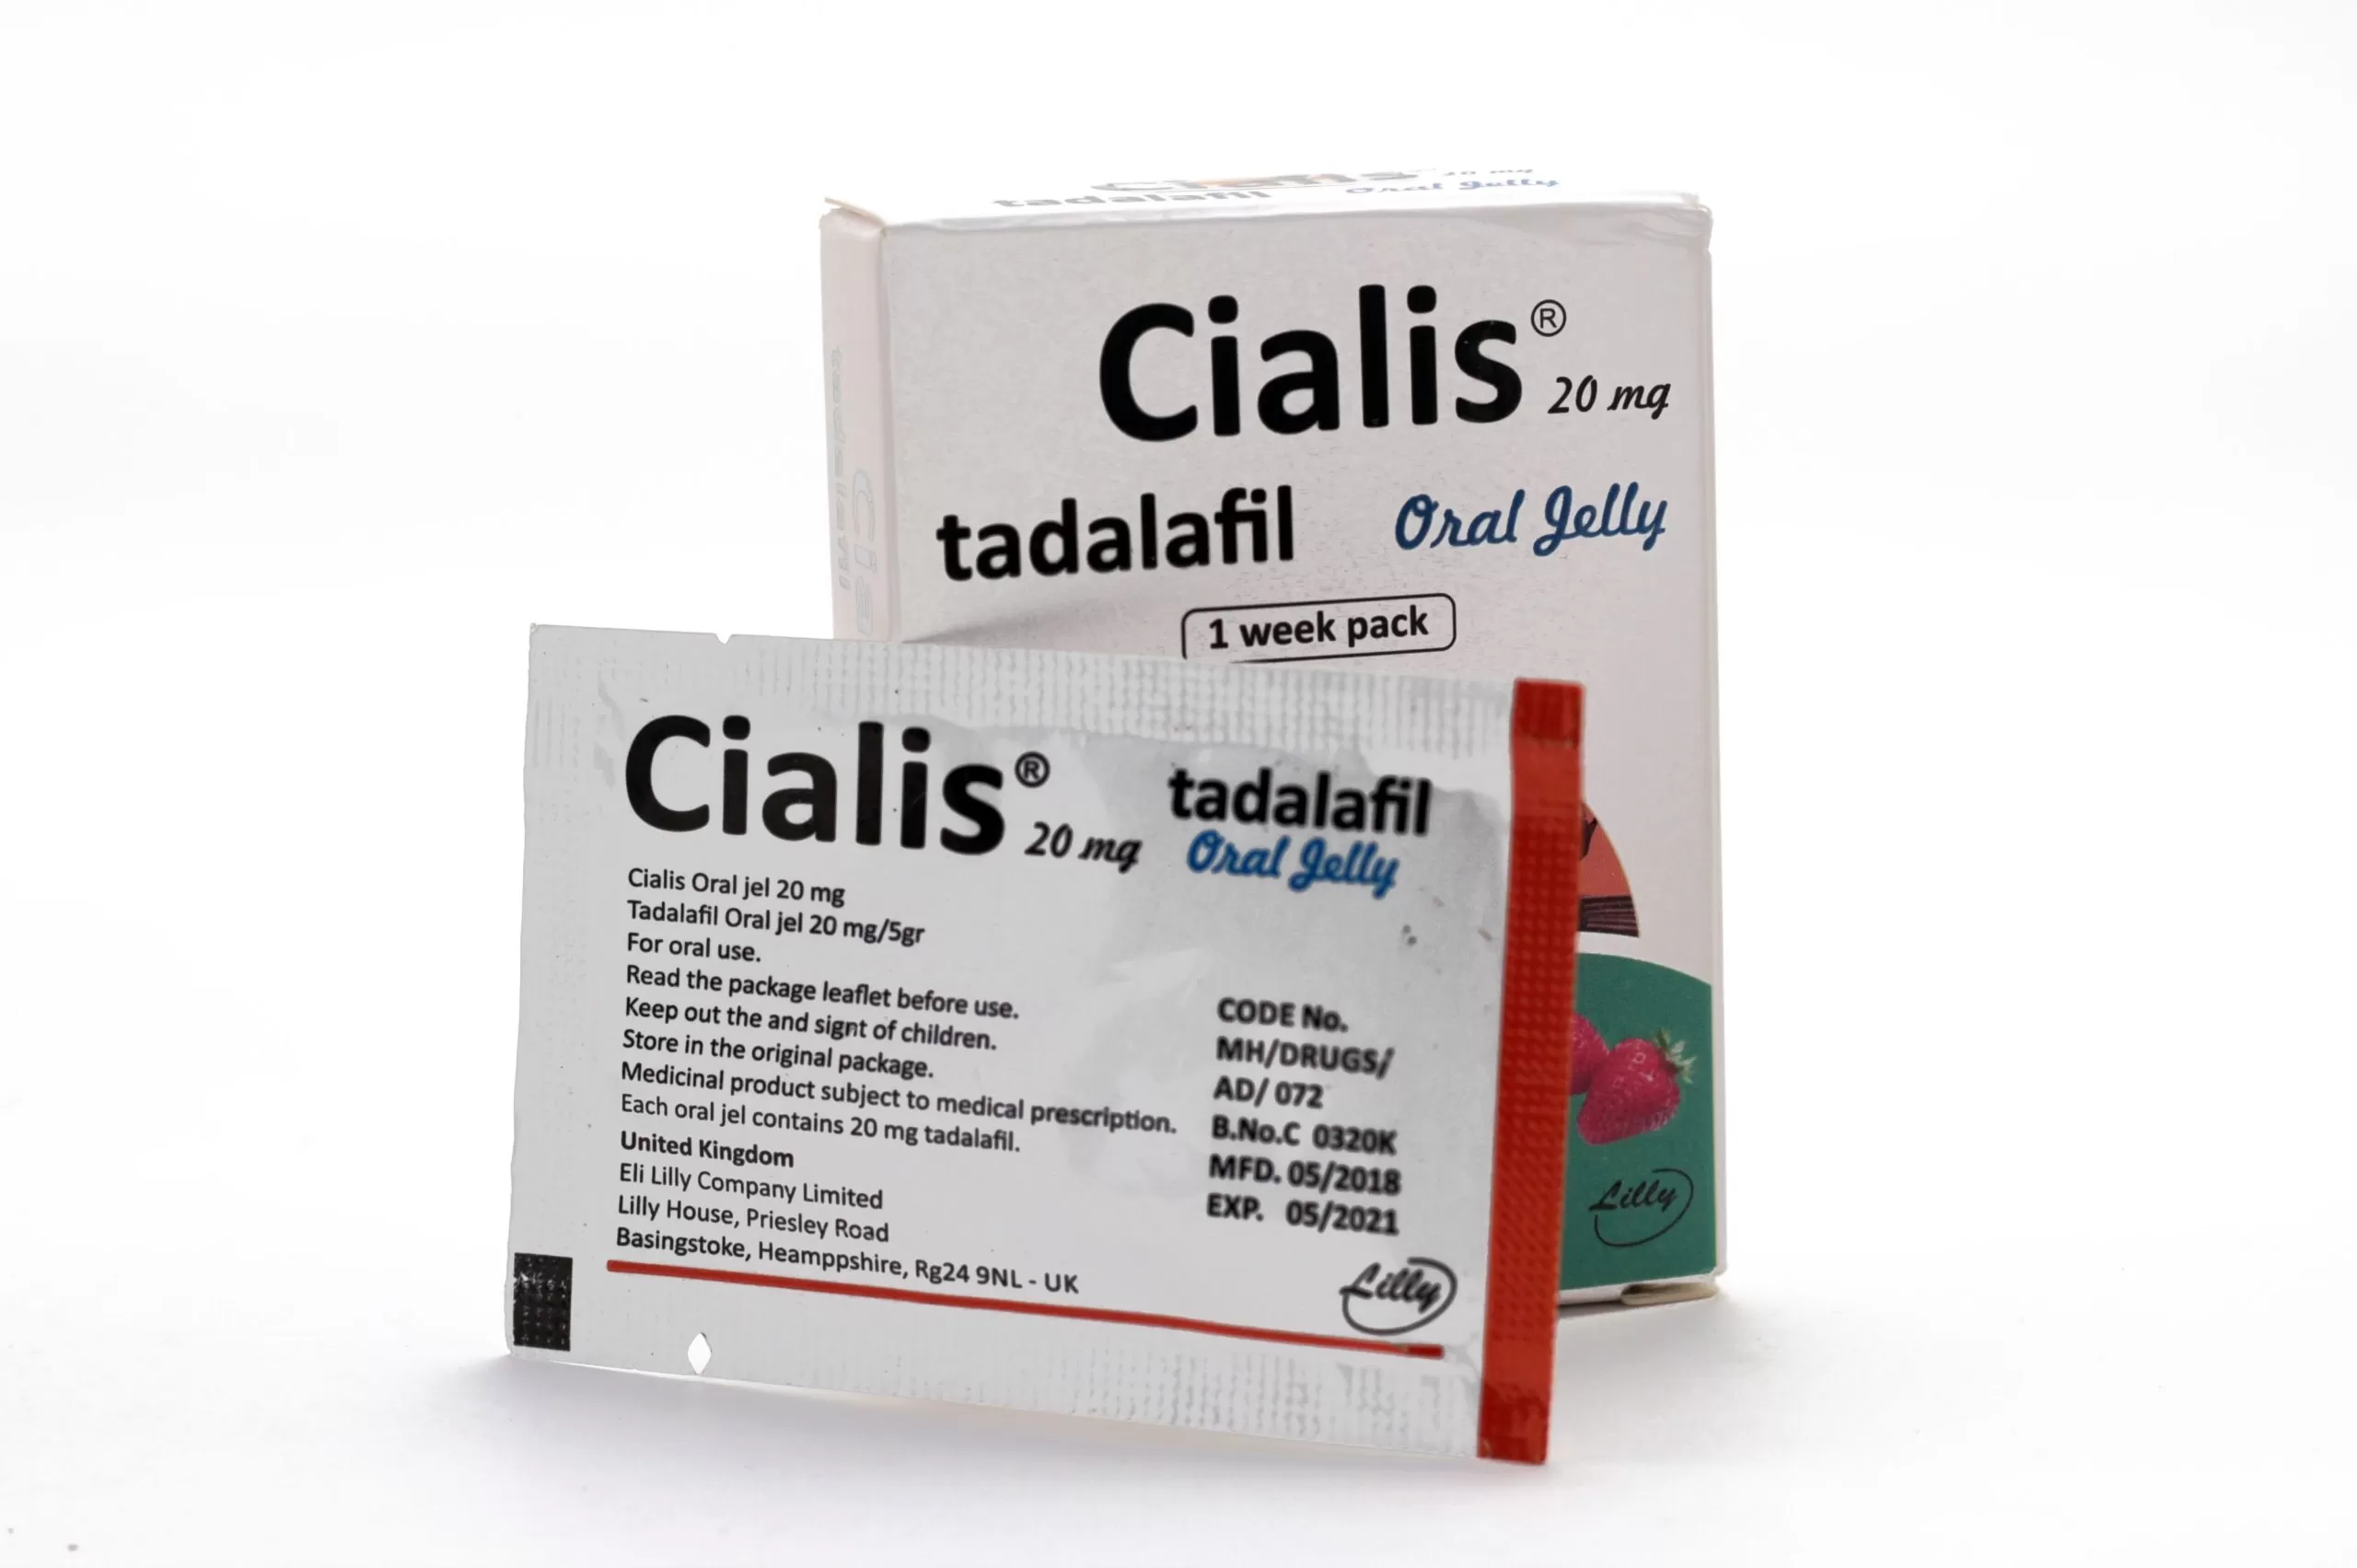 Cialis oral jelly 20mg